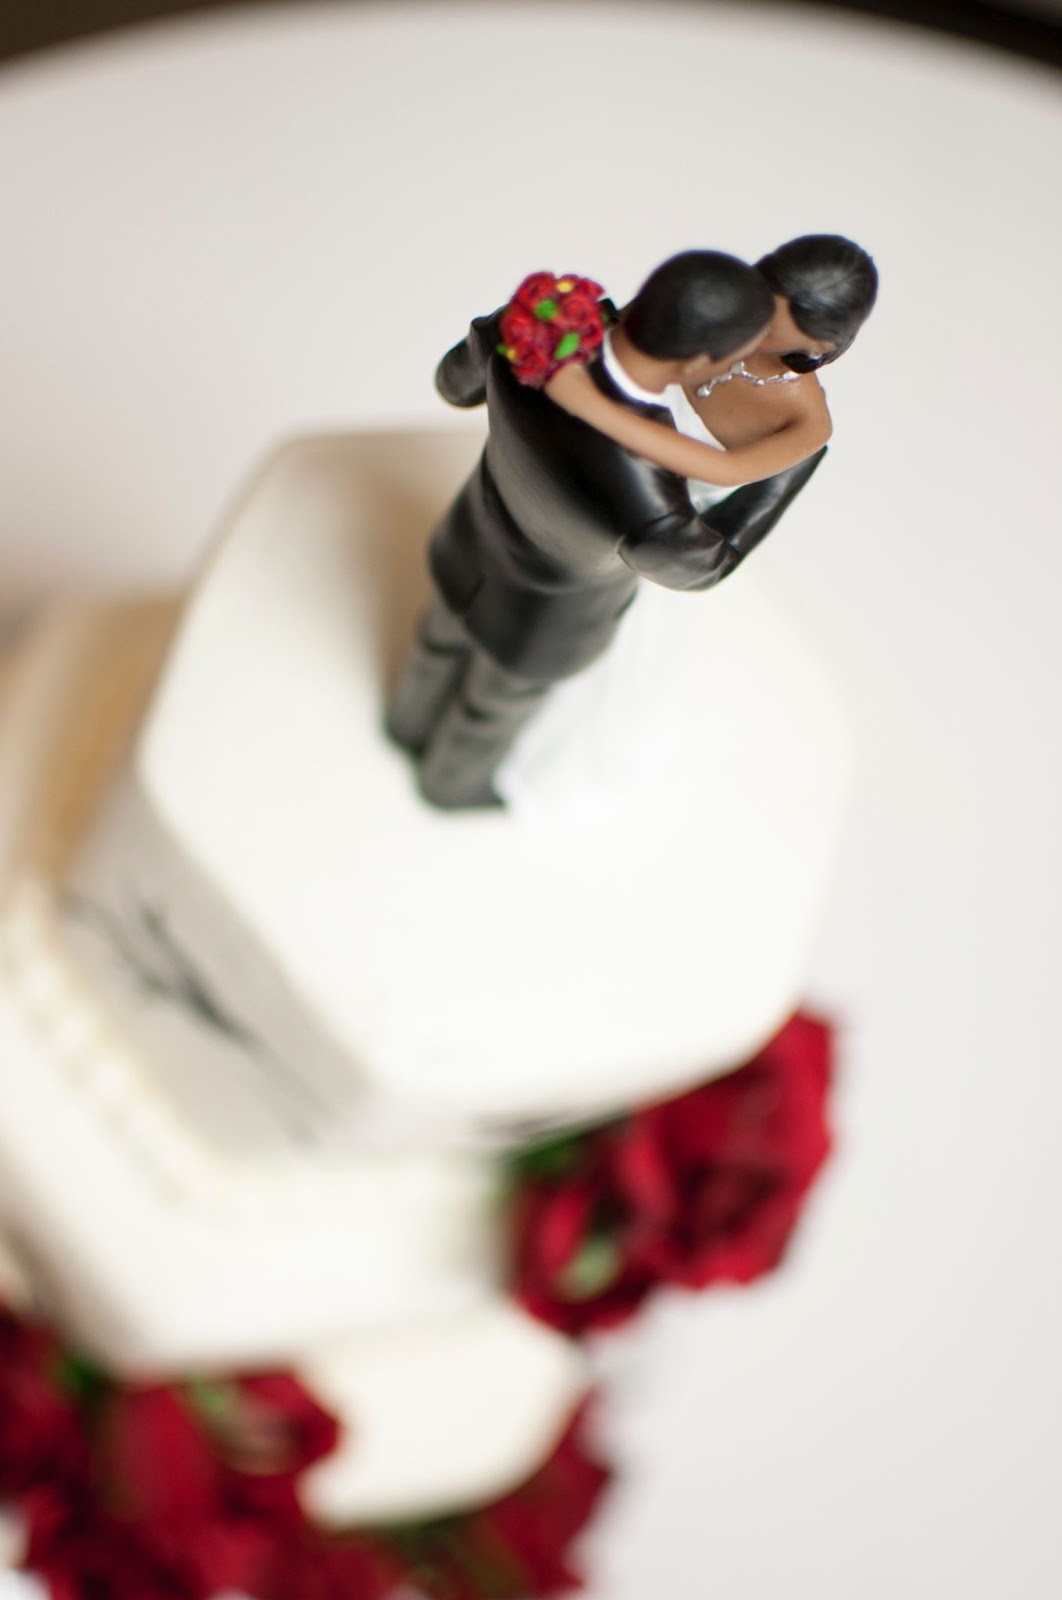 Hilarious Funny Wedding Cake Toppers